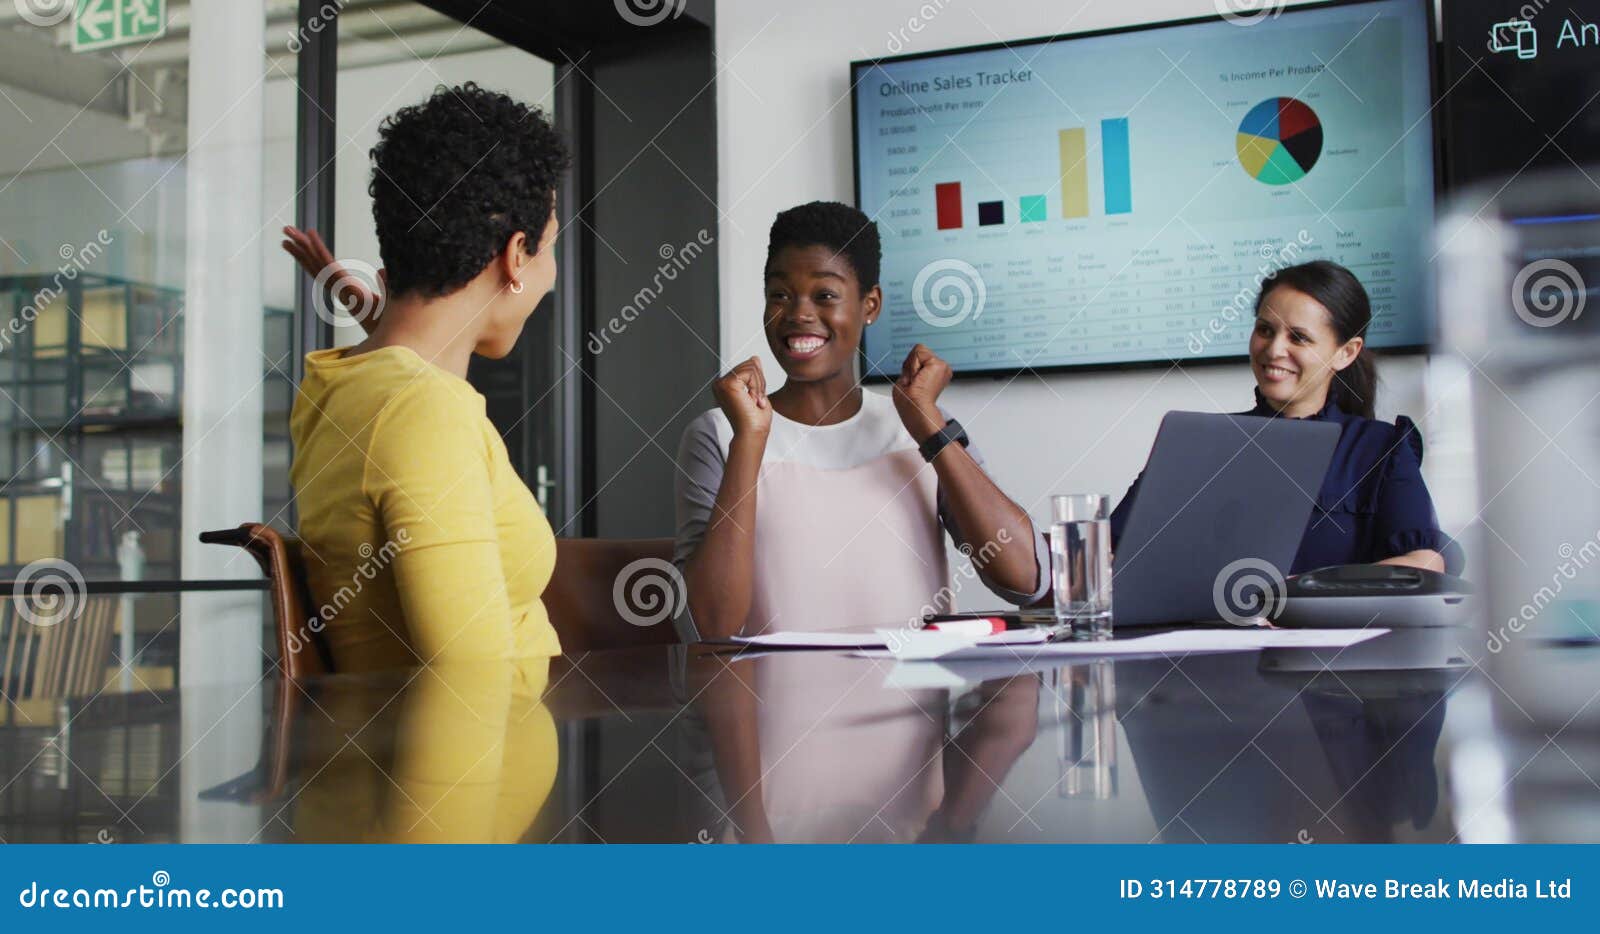 image of data processing and globe over diverse business people high fiving in office